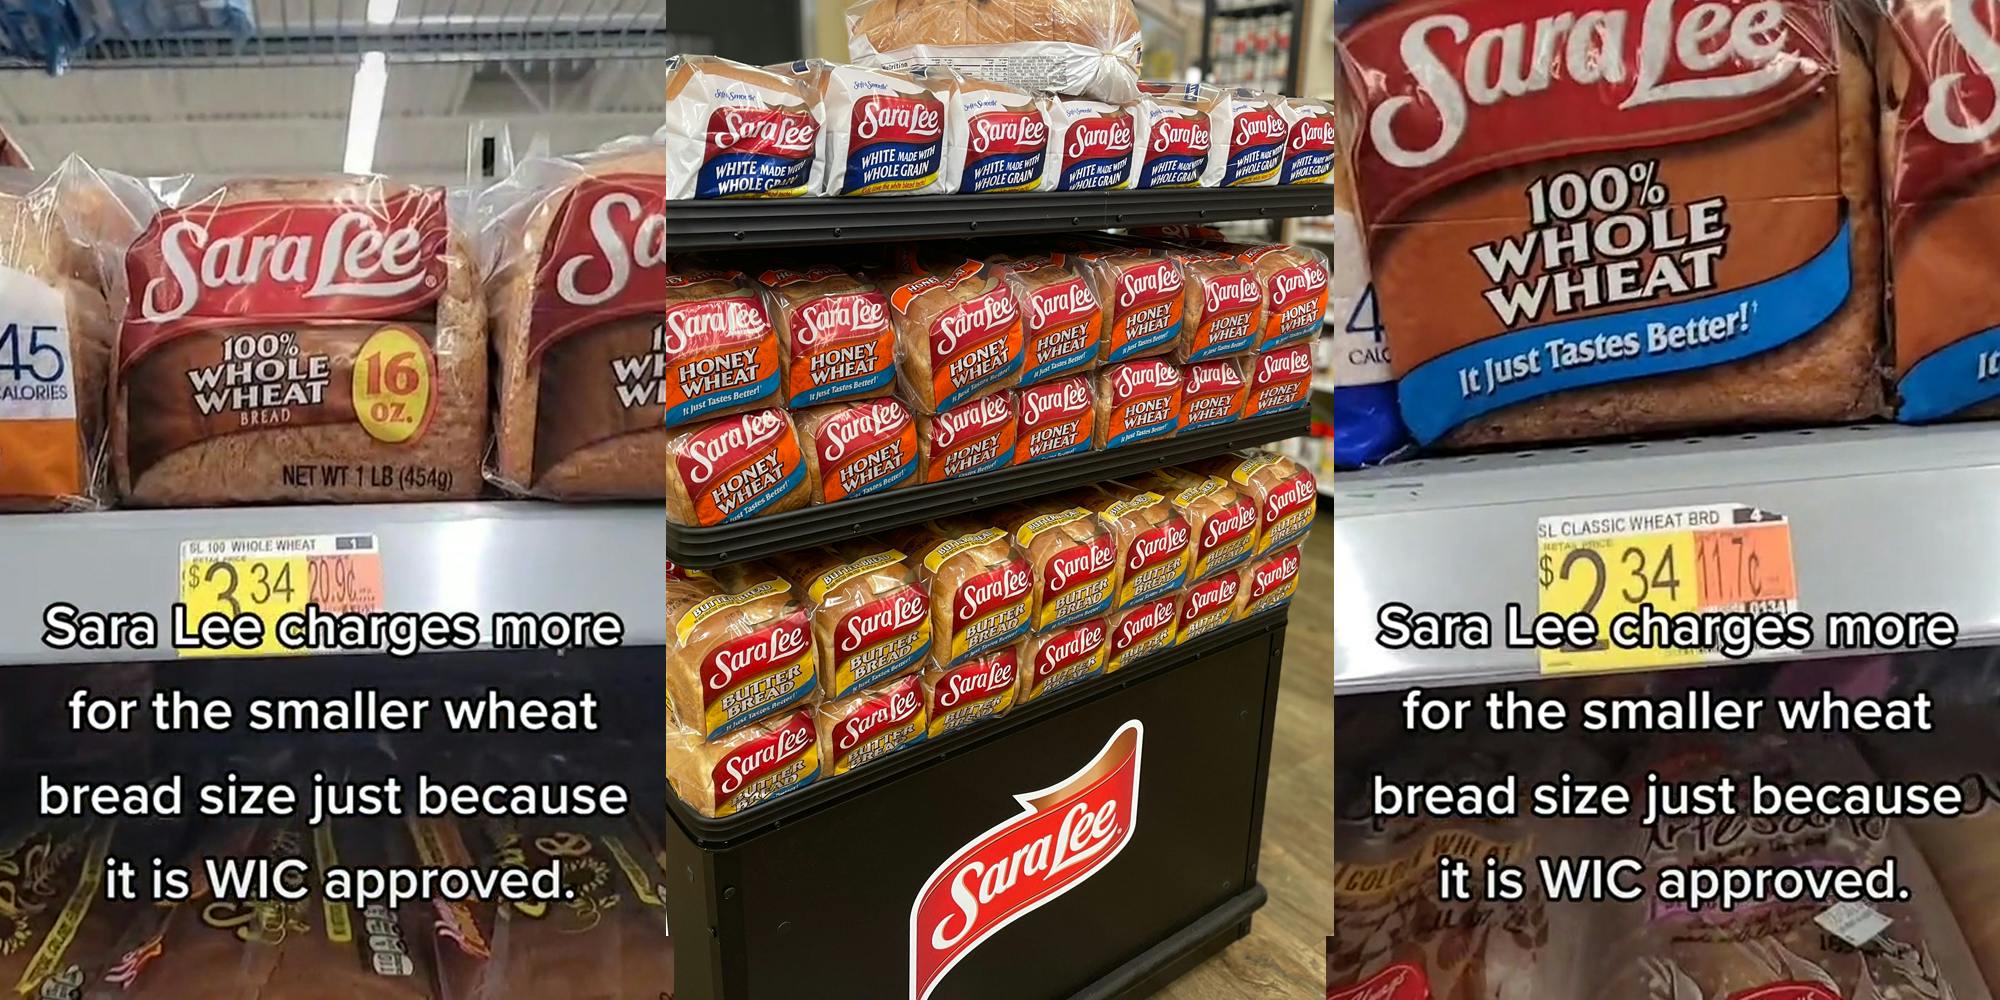 Sara Lee bread on shelf with caption "Sara Lee charges more for the smaller wheat bread size just because it is WIC approved." (l) Sara Lee bread on display (c) Sara Lee bread on shelf with caption "Sara Lee charges more for the smaller wheat bread size just because it is WIC approved." (r)